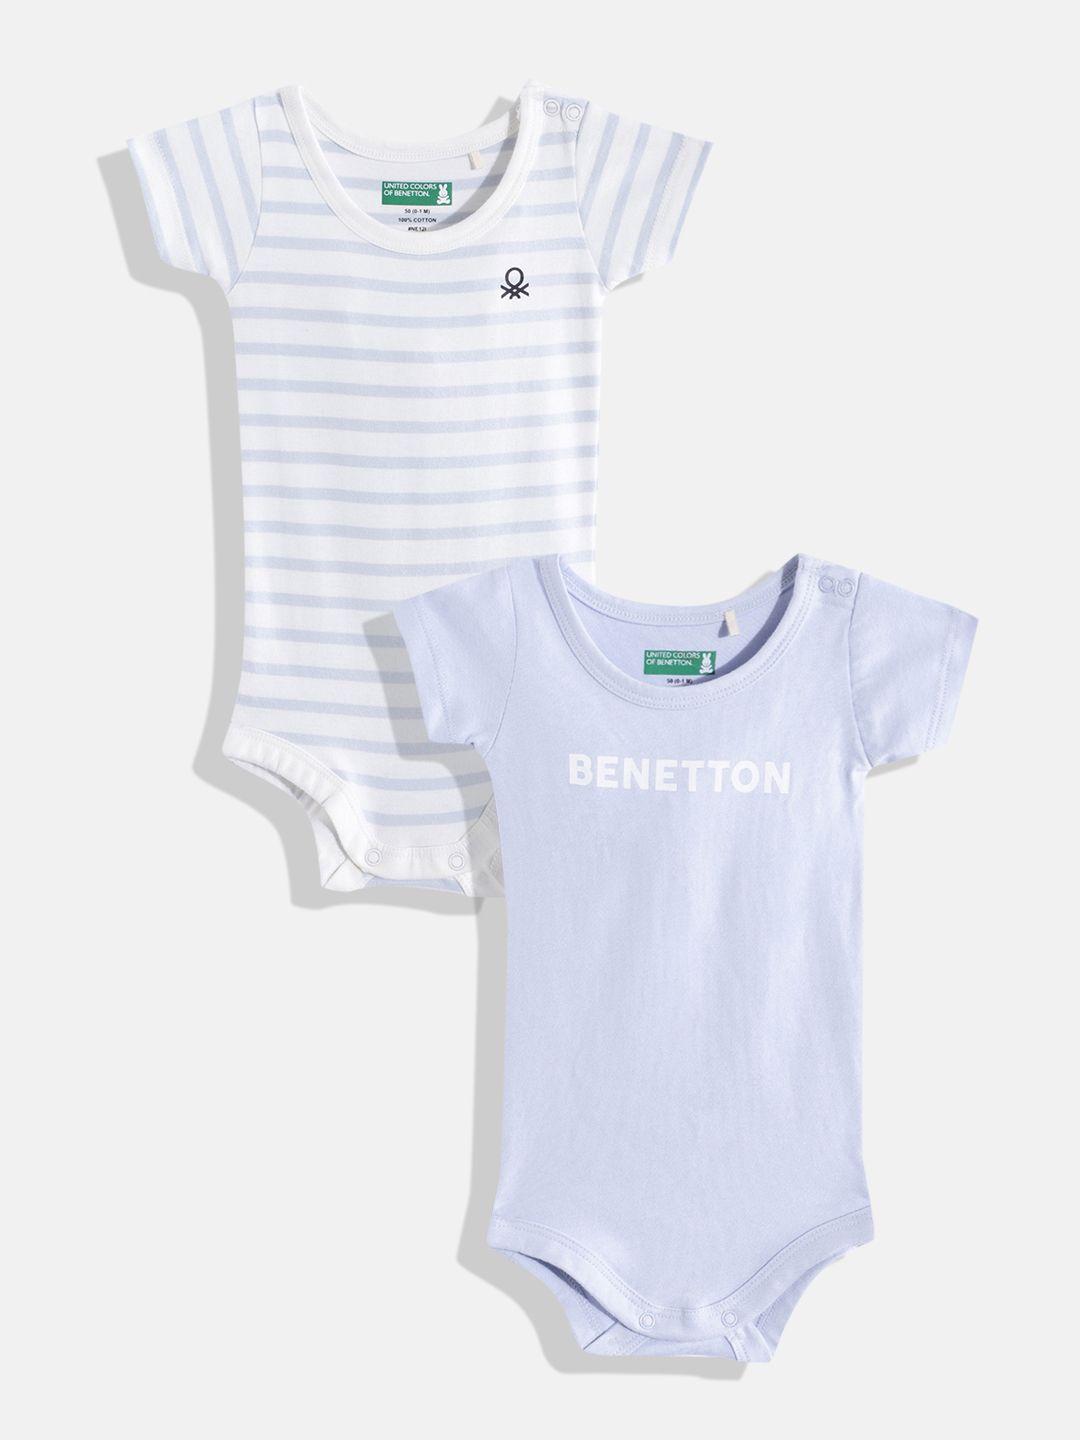 united colors of benetton infant boys pack of 2 pure cotton rompers